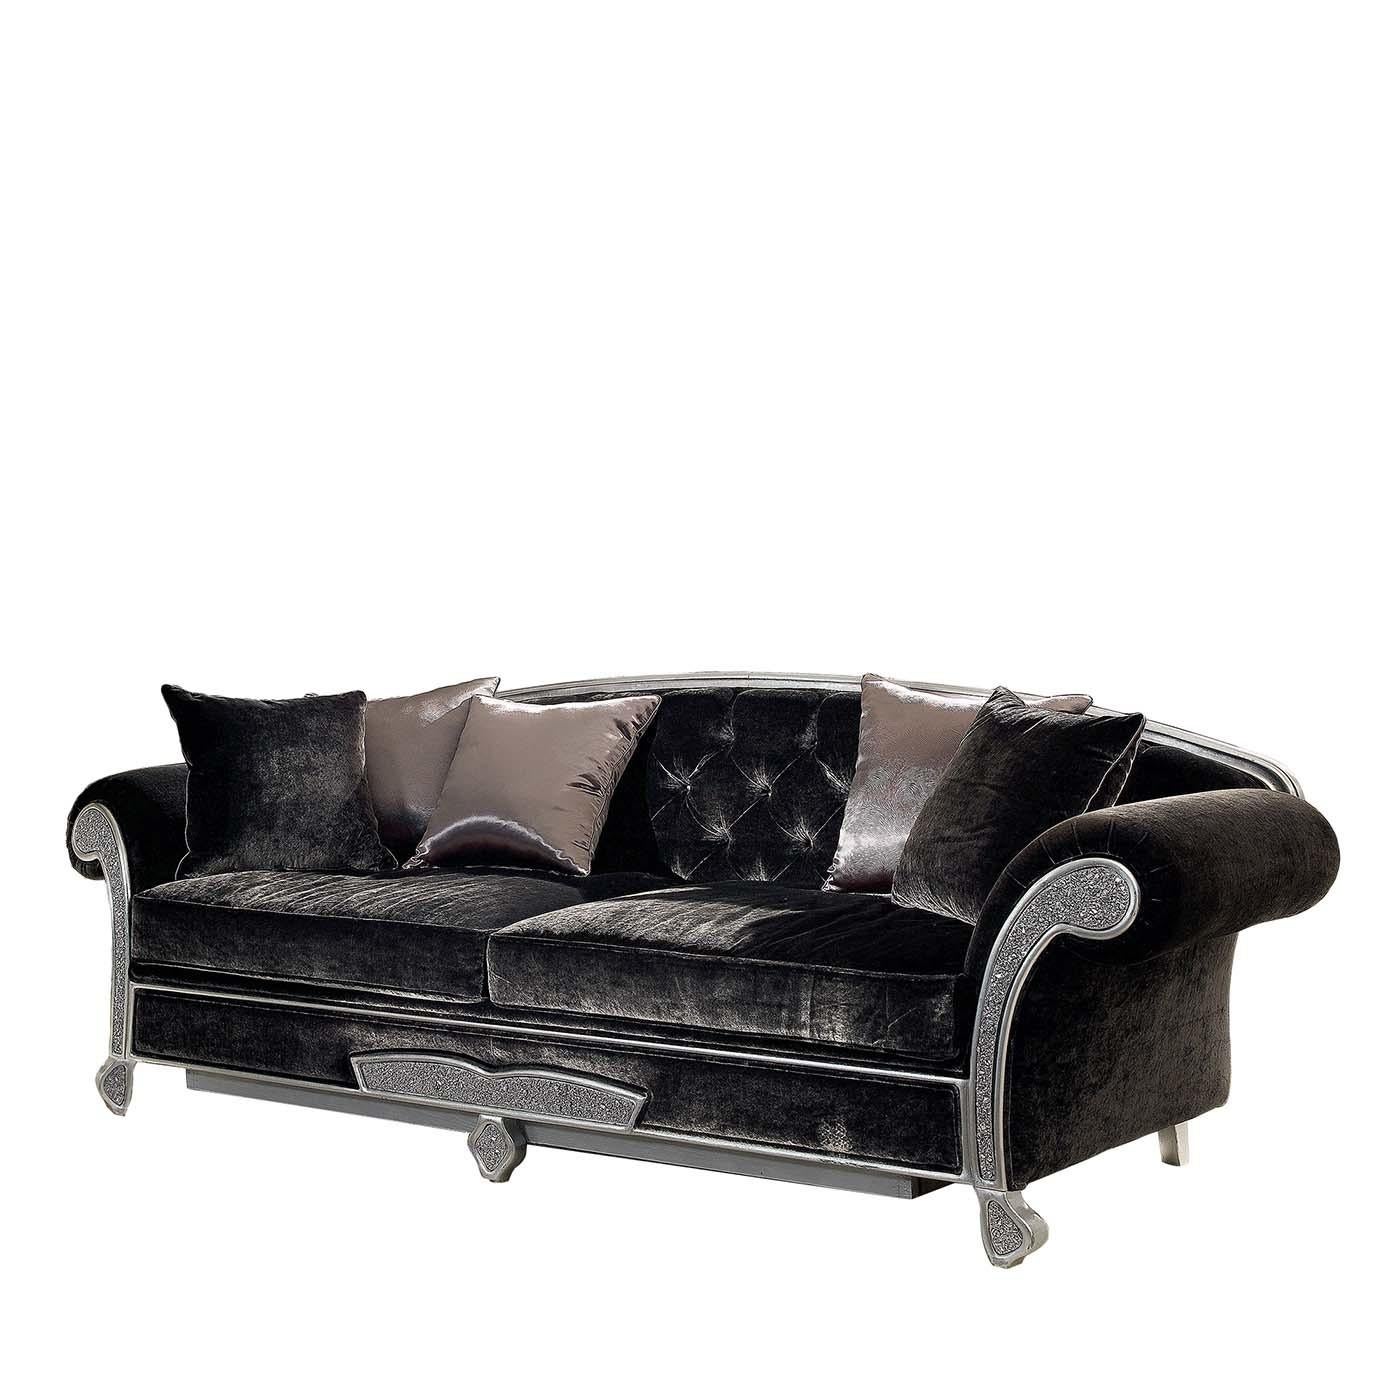 Interpreting the traditional cabriole sofa with modern elegance, this sofa bed is a precious addition to a classic interior, where it will provide comfort and glamour, while also serving as an extra bed for guests. The chic curls of the legs,